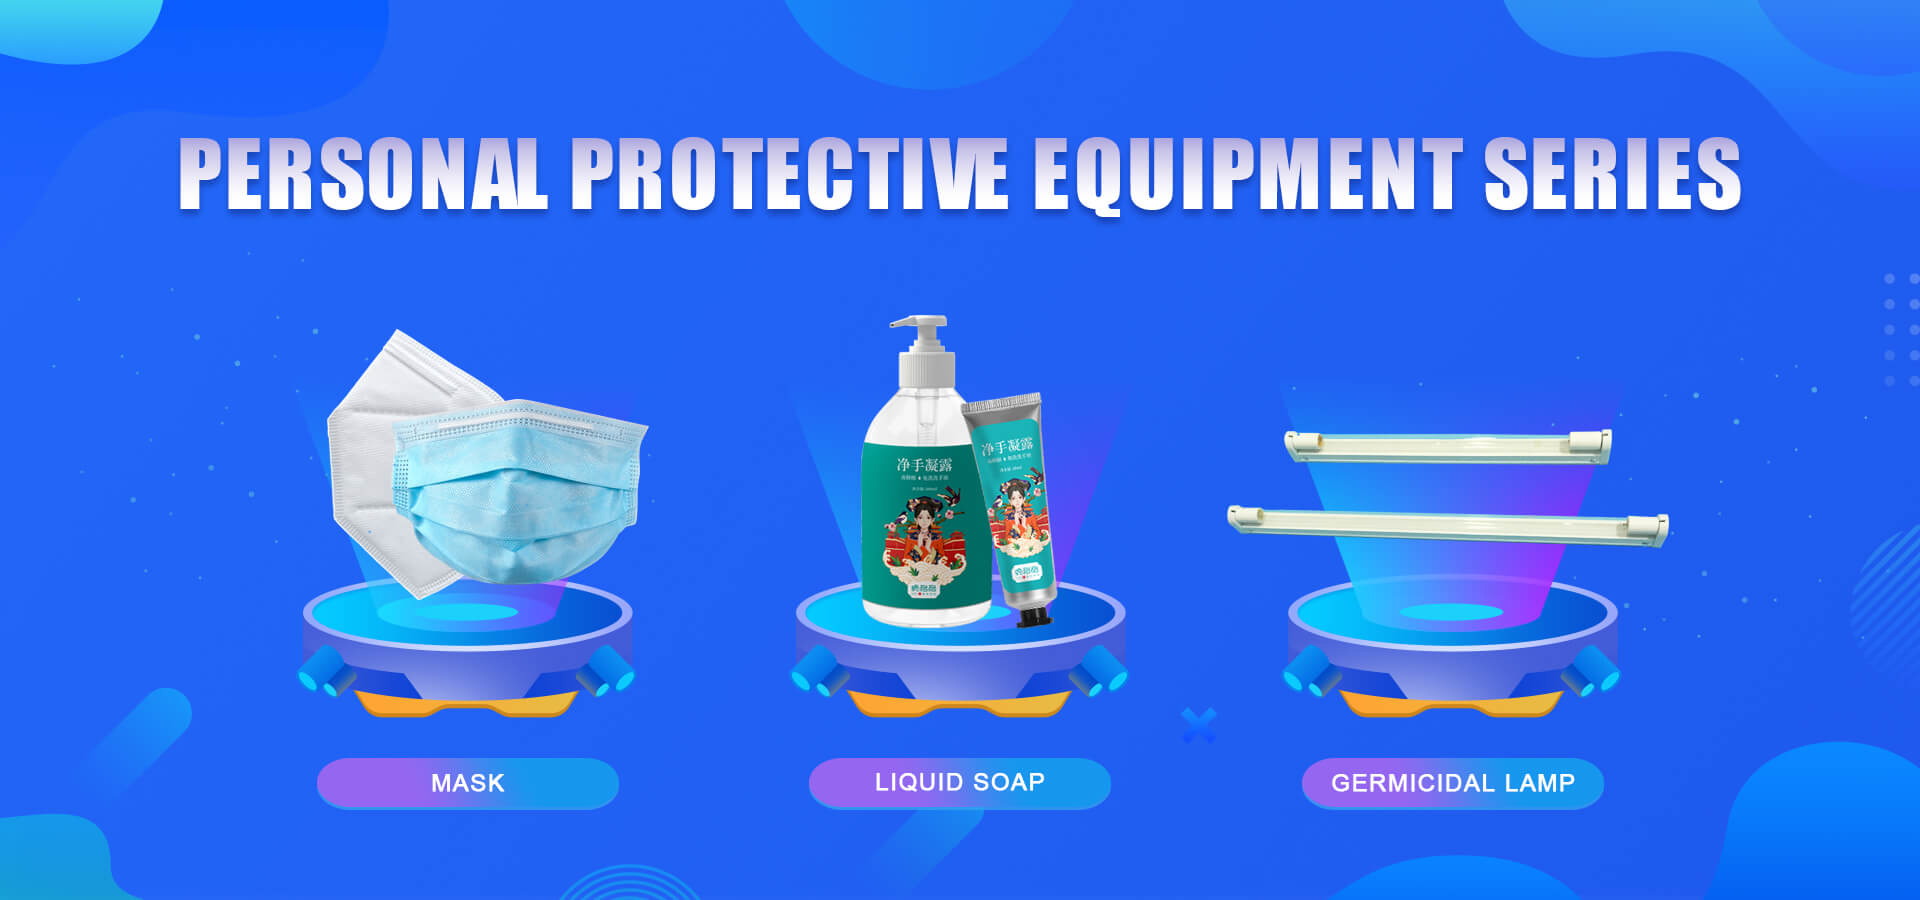 New Business of Civil Protective Equipment